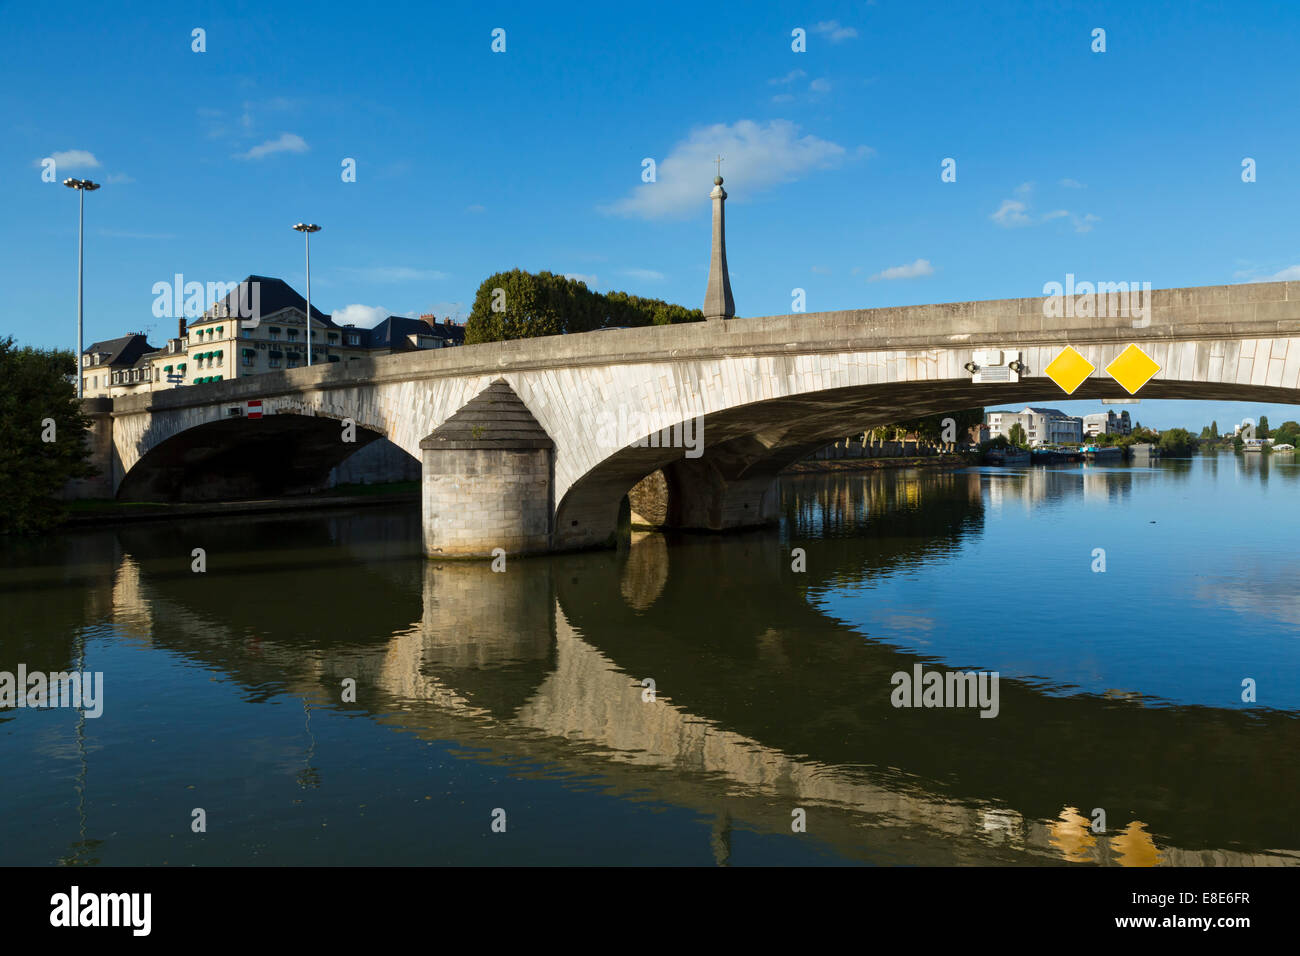 The River Oise, Compiegne, Picardy, France Stock Photo